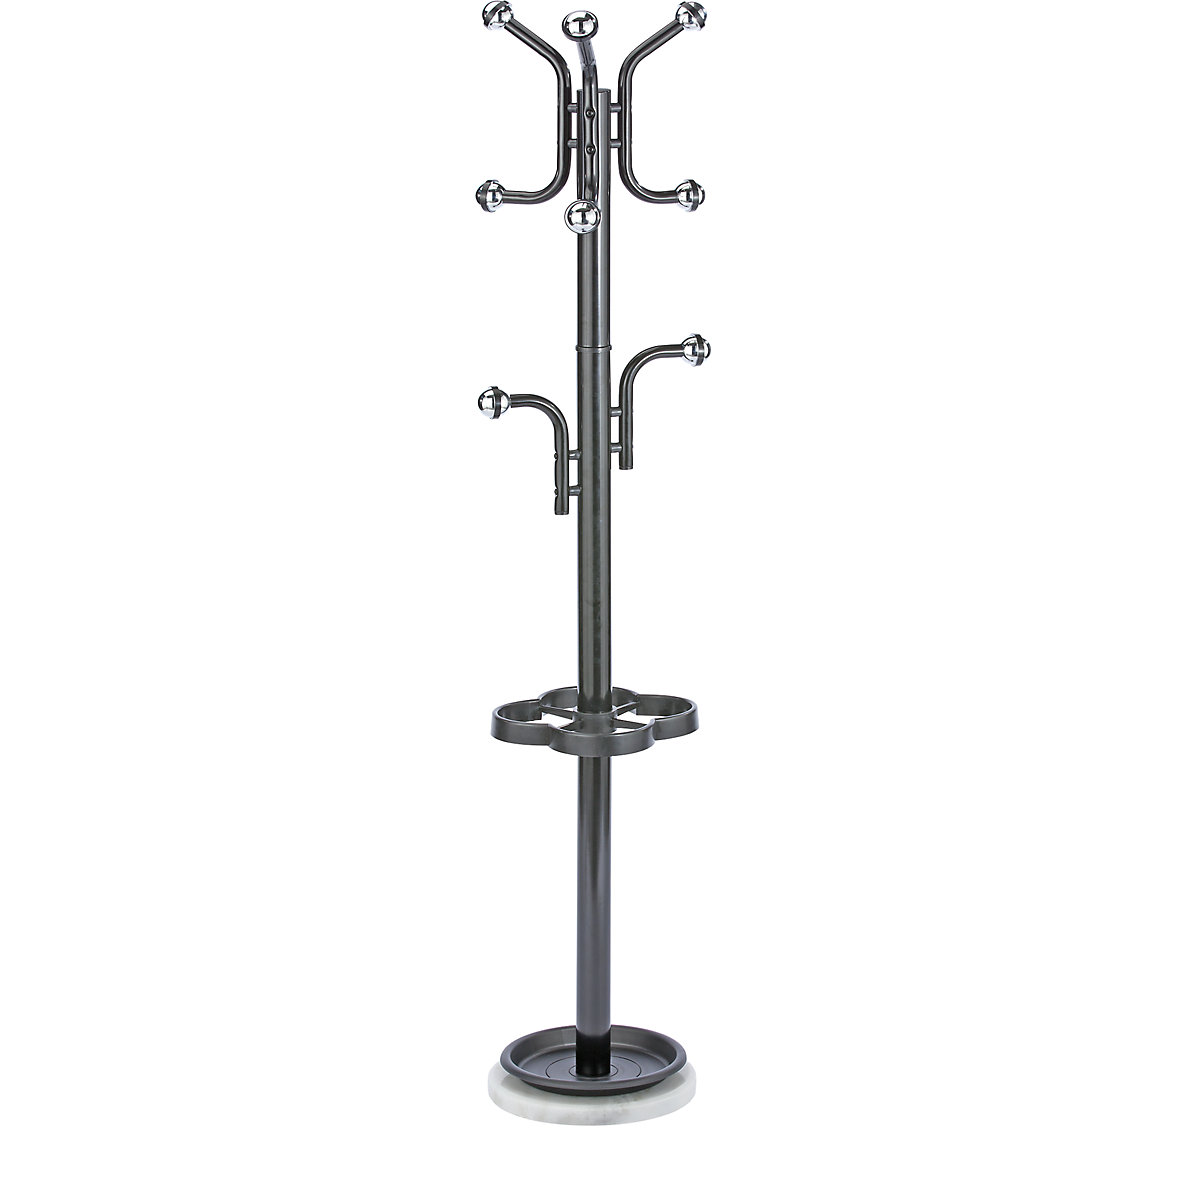 Coat stand with chrome coloured hook balls